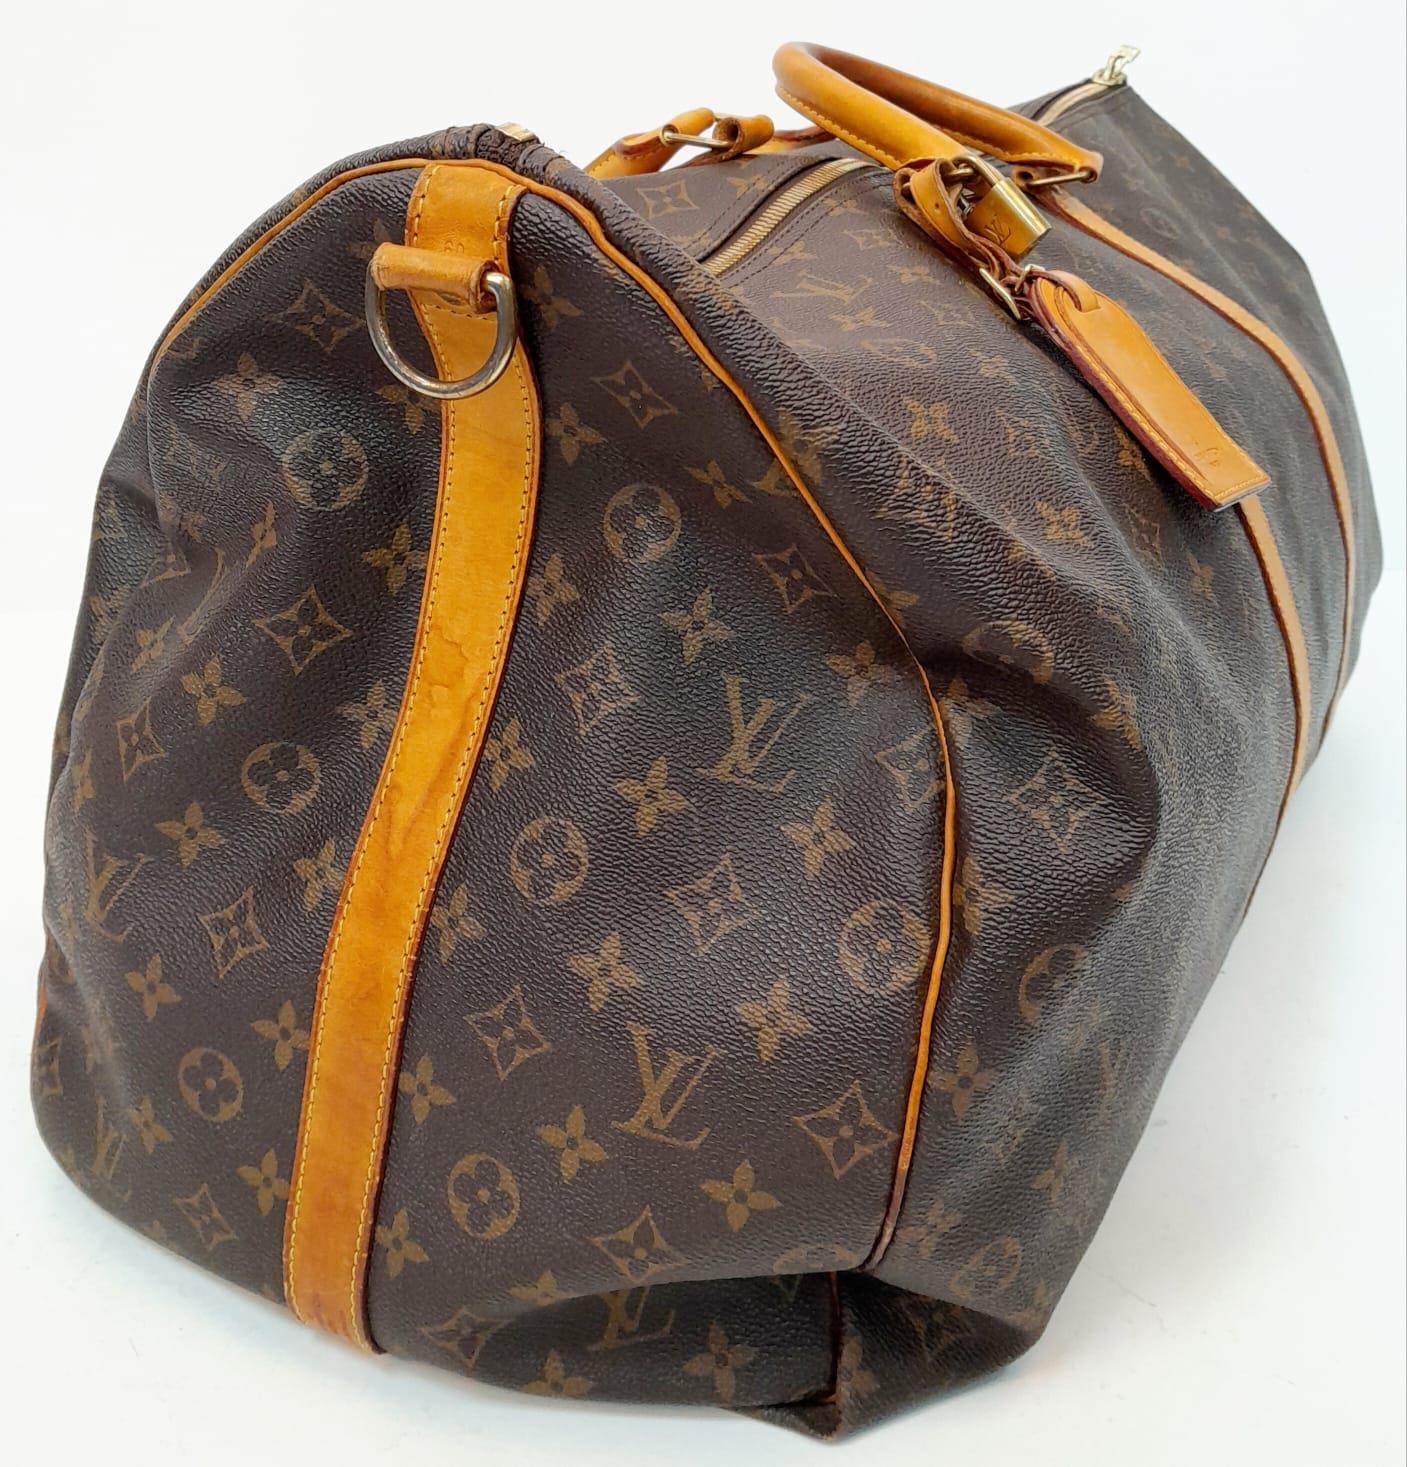 A Large Louis Vuitton Keepall Travel Bag. Monogram LV canvas exterior with cowhide leather handles - Image 3 of 8